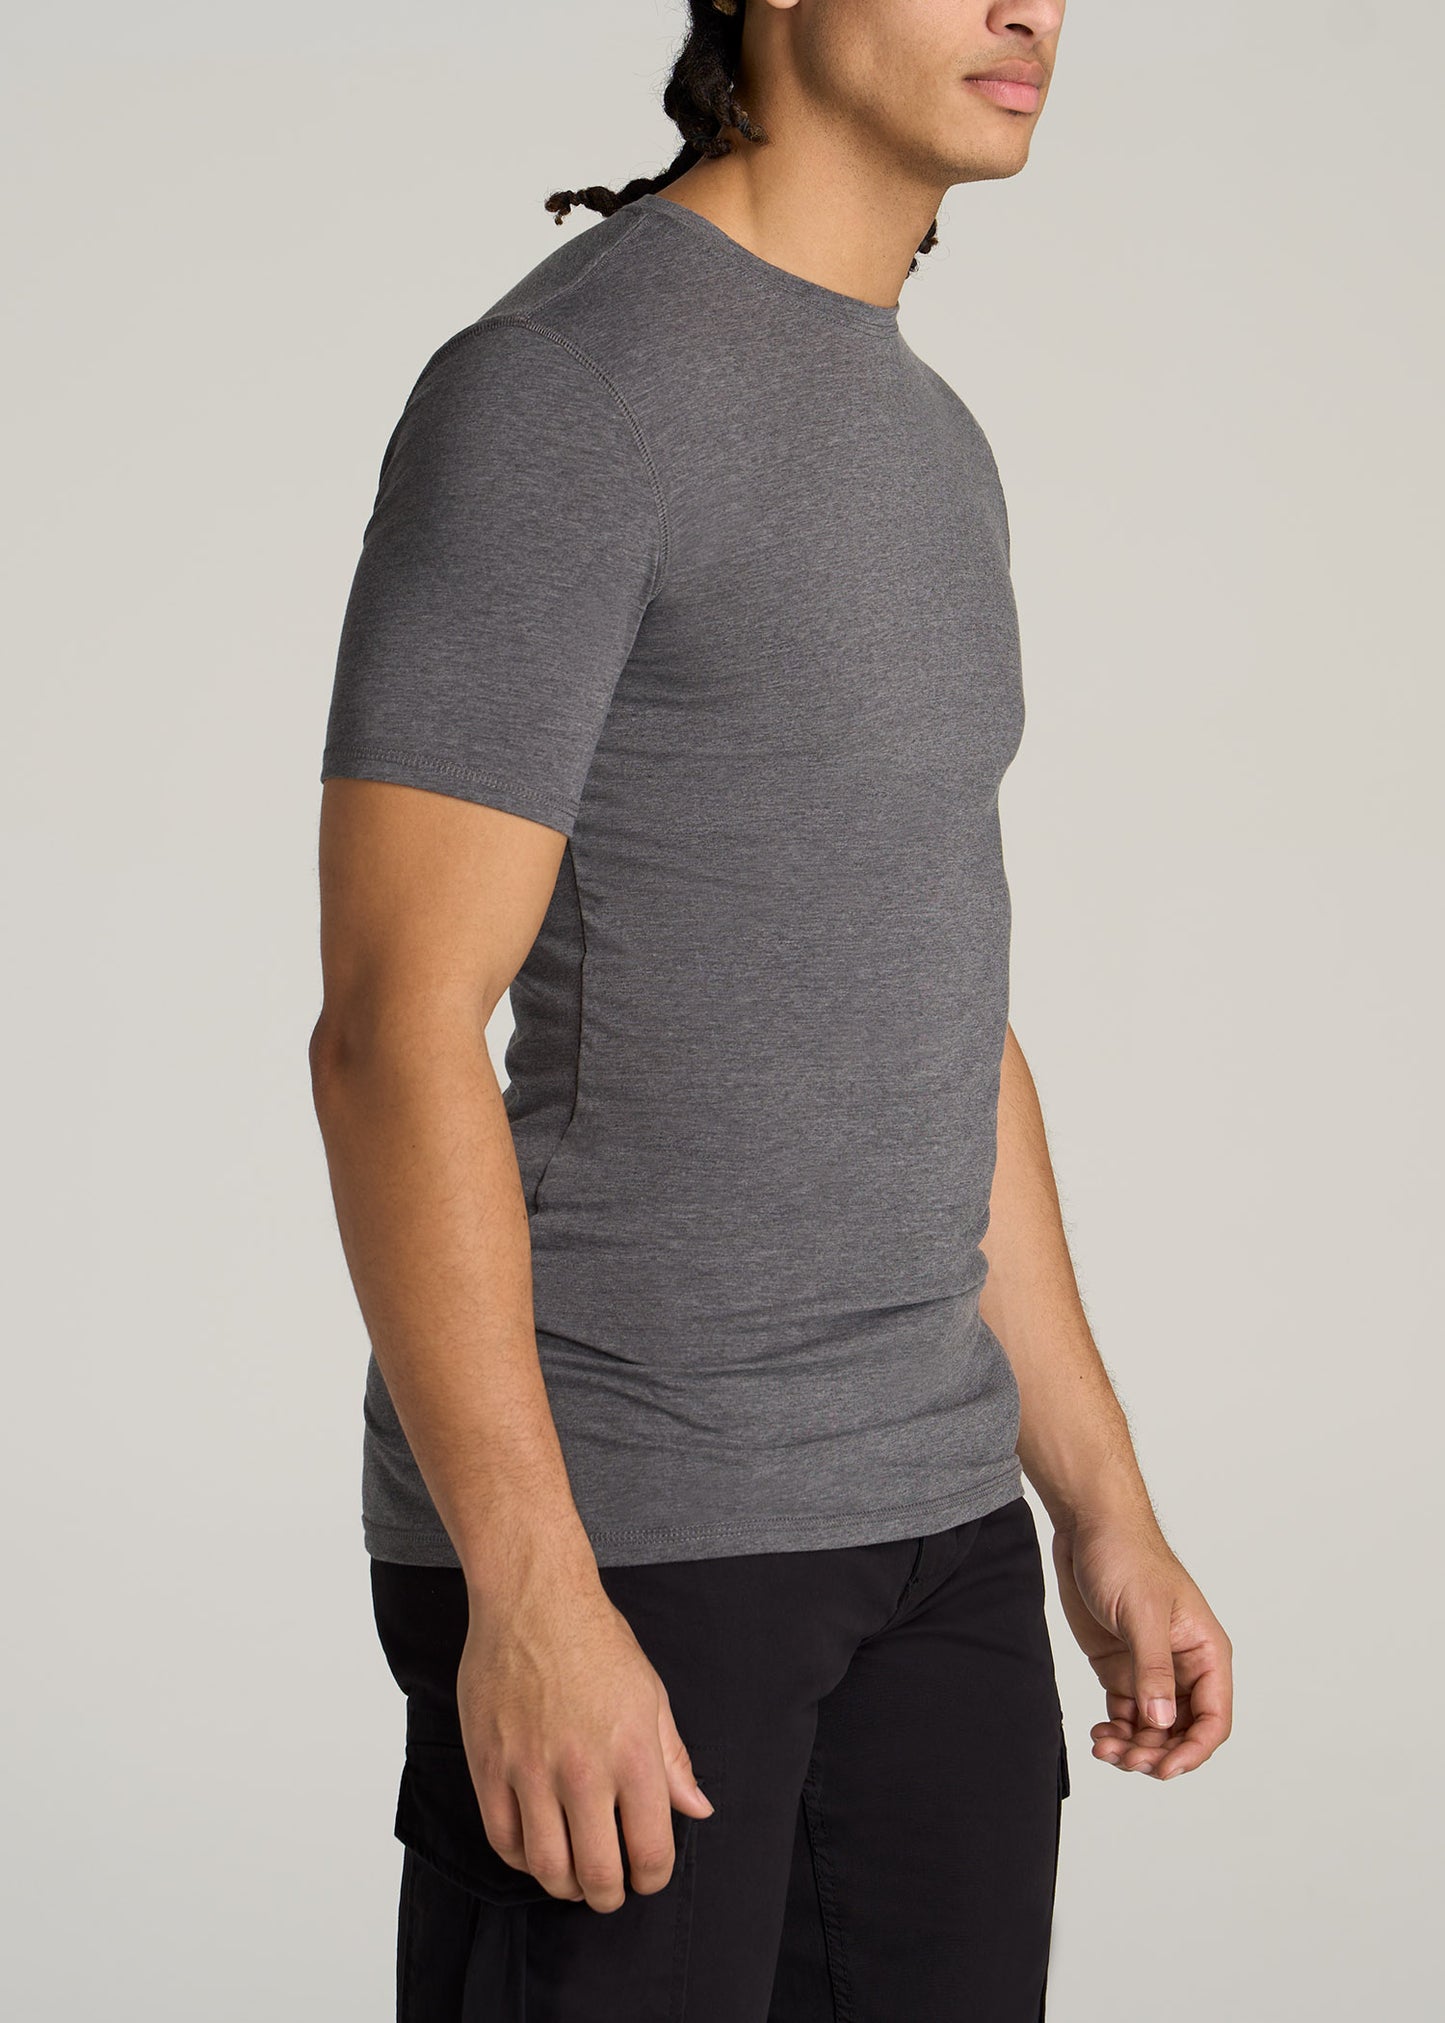    American-Tall-Men-Essential-SLIM-FIT-Crew-Neck-Tees-Charocal-Mix-side